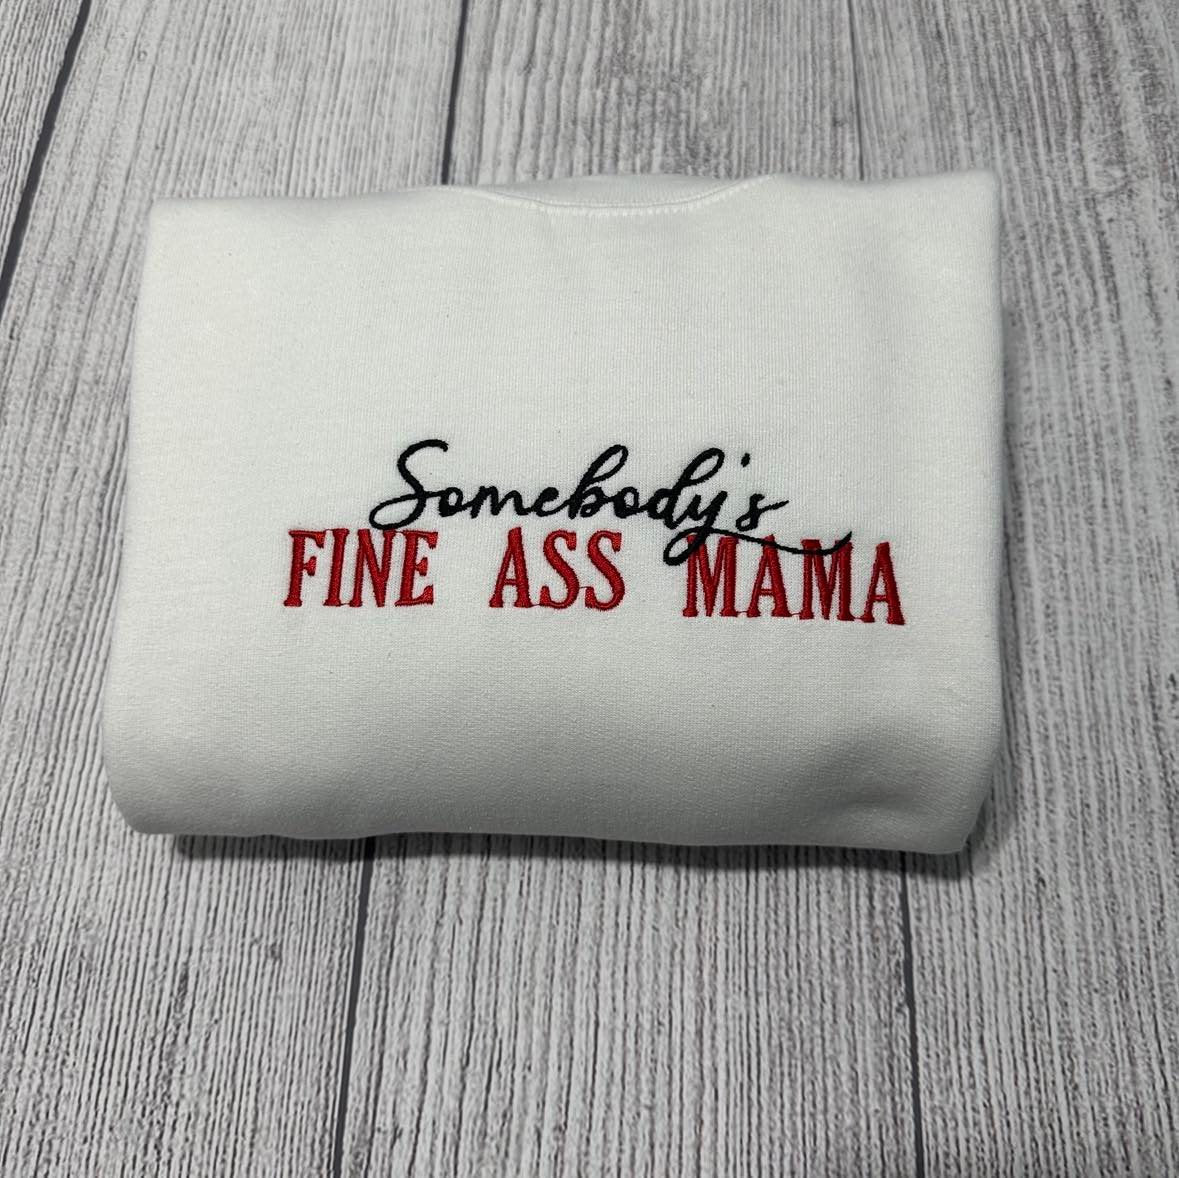 somebody's fine ass  Mama Embroidered sweatshirt; Funny Mama  embroidered crewneck; gift for her custom embroidery shirts; girlfriend gift